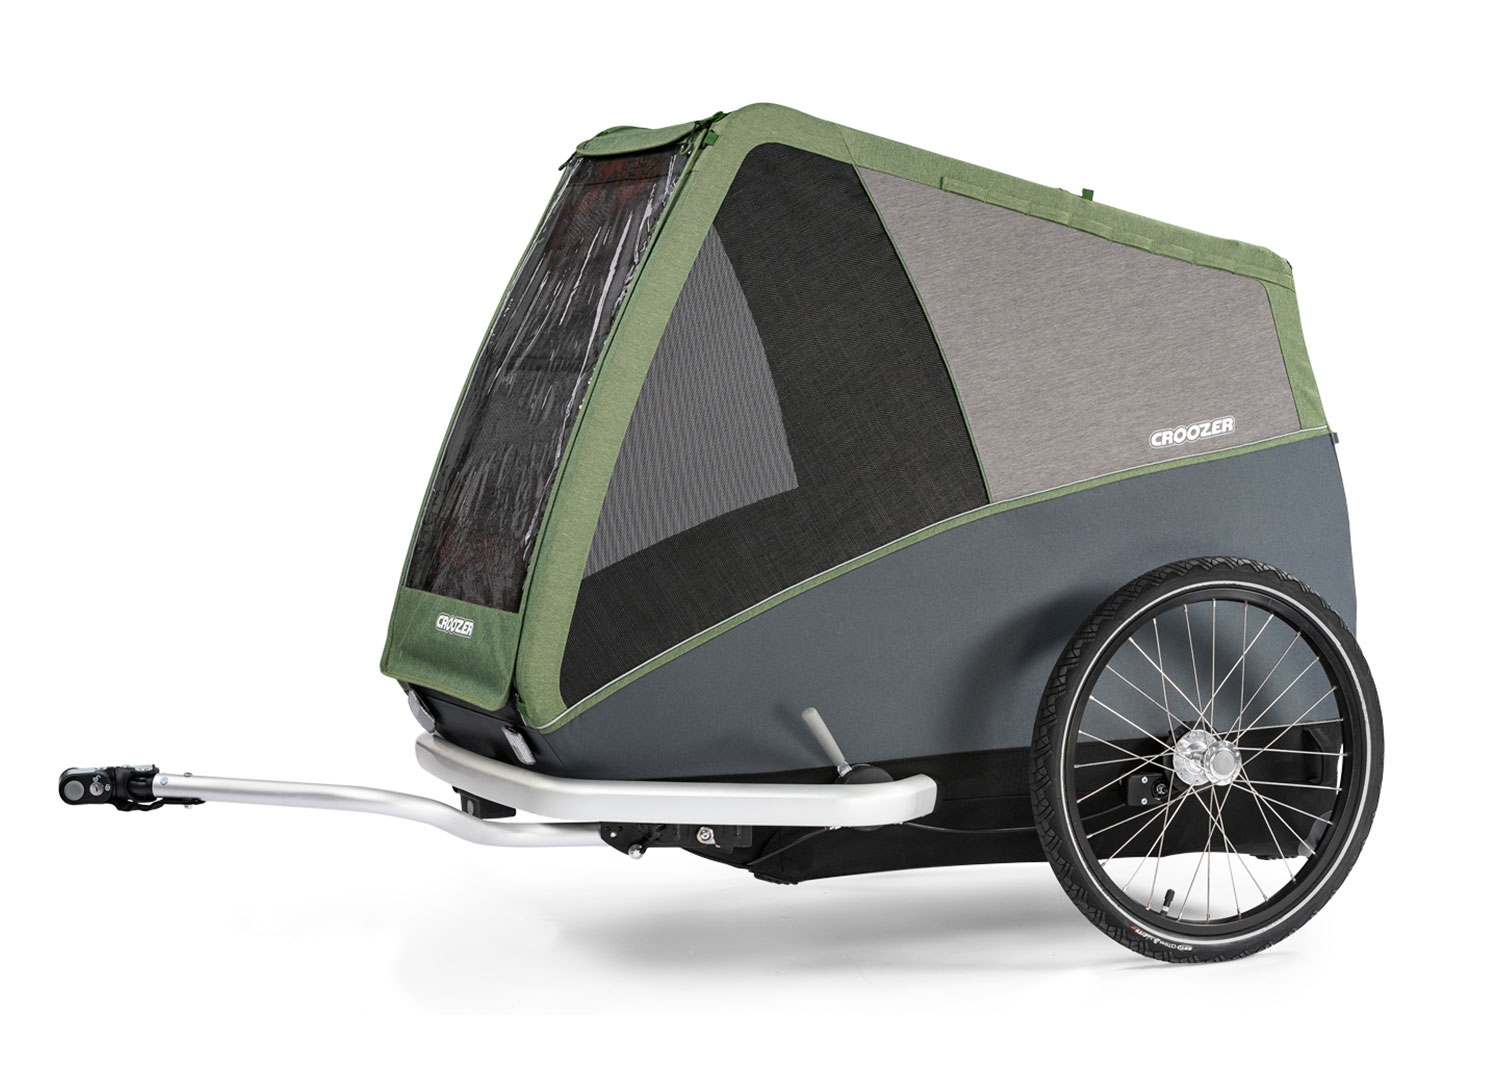 Dog Bruuno - bicycle trailer for extra 